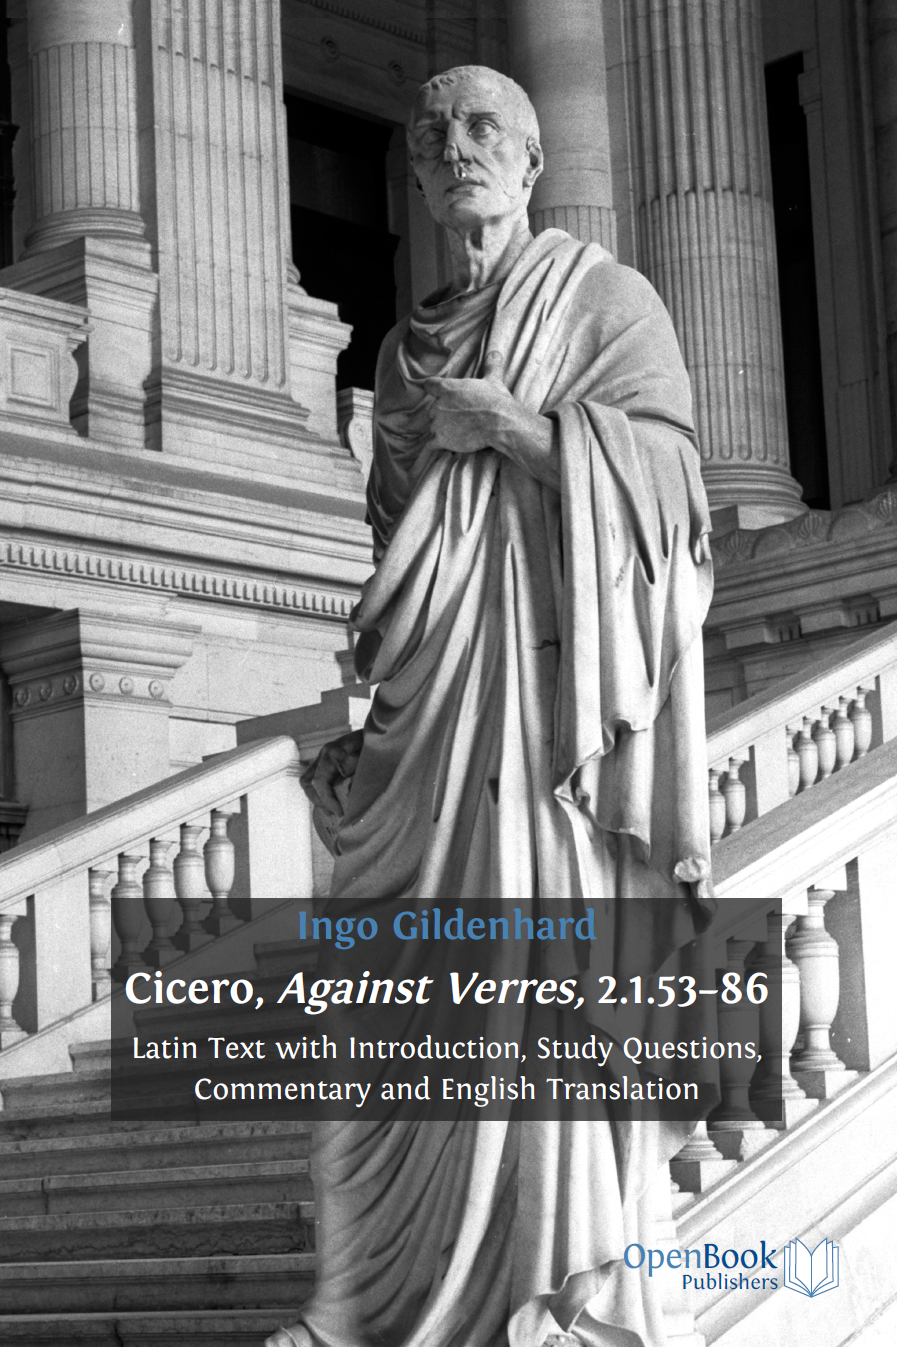 Read more about Cicero, Against Verres, 2.1.53-86. Latin Text with Introduction, Study Questions, Commentary and English Translation